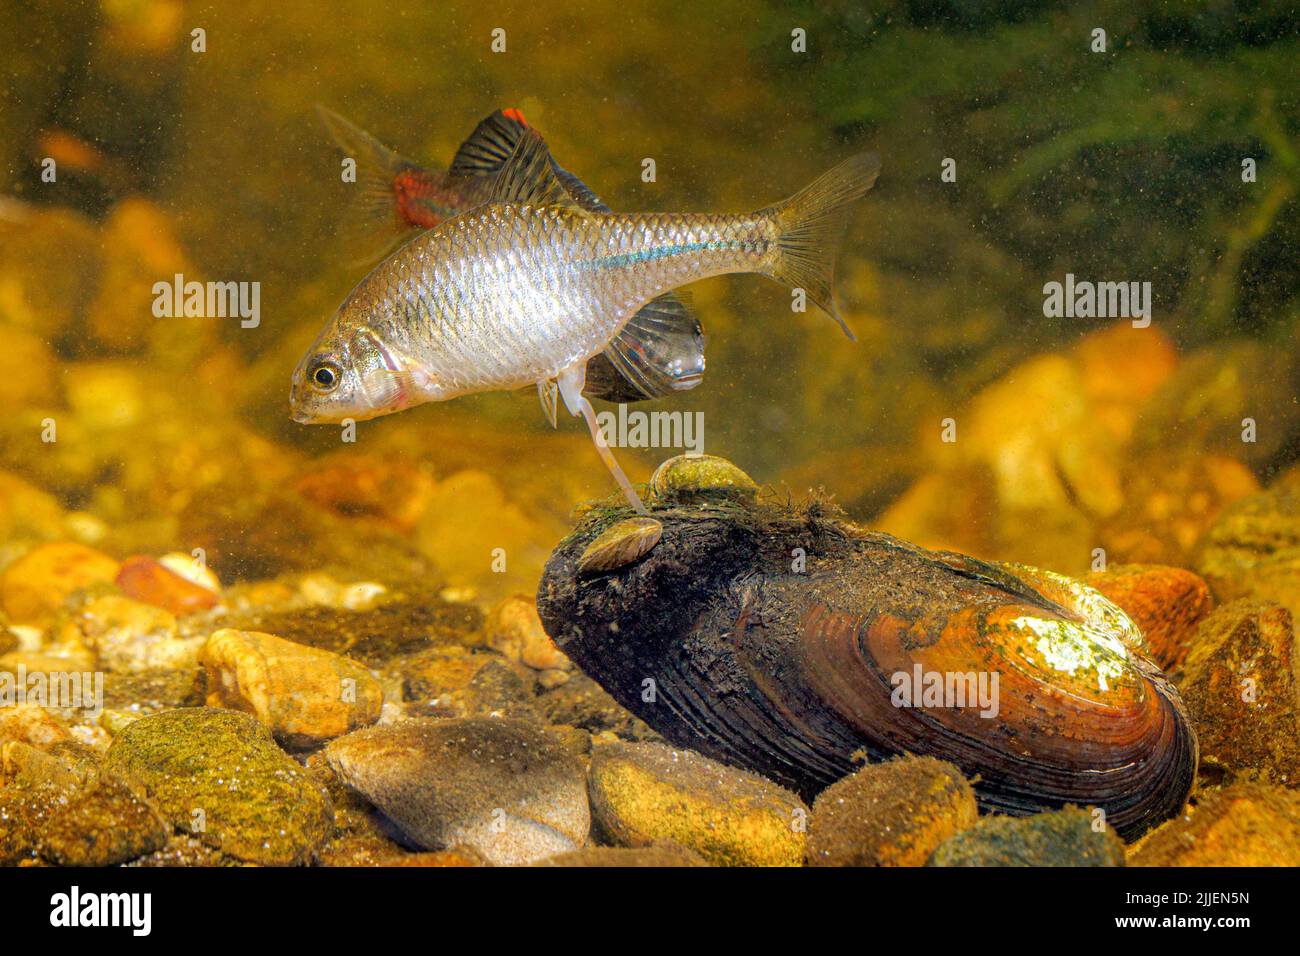 bitterling (Rhodeus amarus, Rhodeus sericeus, Rhodeus sericeus amarus), female spawning into a painter's mussel, with male in the background, Germany Stock Photo